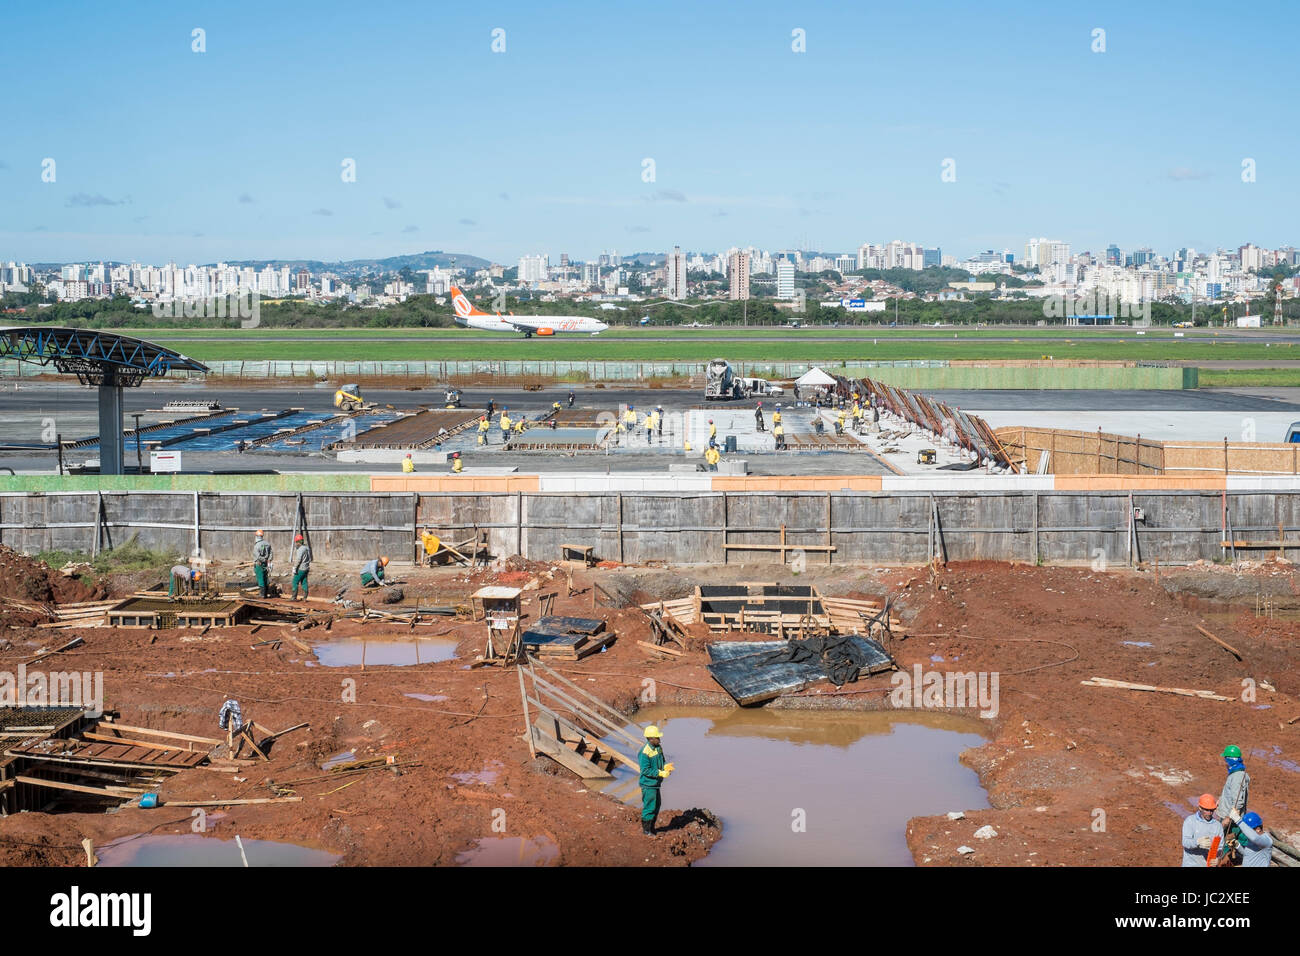 PORTO ALEGRE, BRAZIL - JULY 25: A Brazilian airplane lands next to Salgado Filho's airport expansion works. The expansion was intended to be finished in May for the World Cup, but a series of industrial actions set the new completion forecast to 2016. July 25, 2014 in Porto Alegre, Brazil. Stock Photo